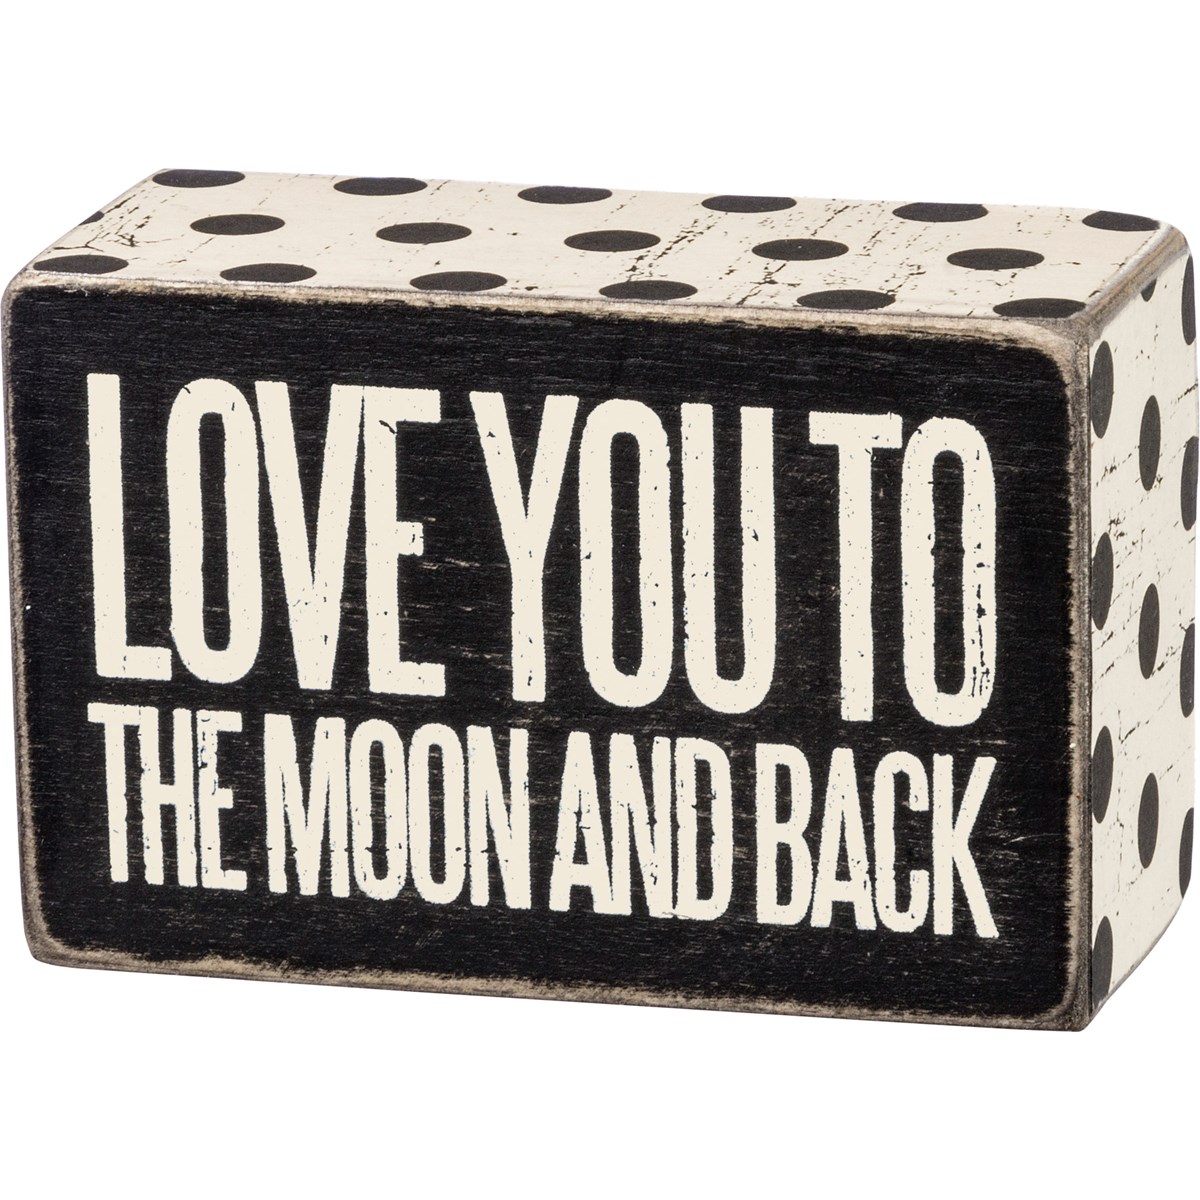 Box Sign - To The Moon - 4" x 2.50" x 1.75" - Wood, Paper